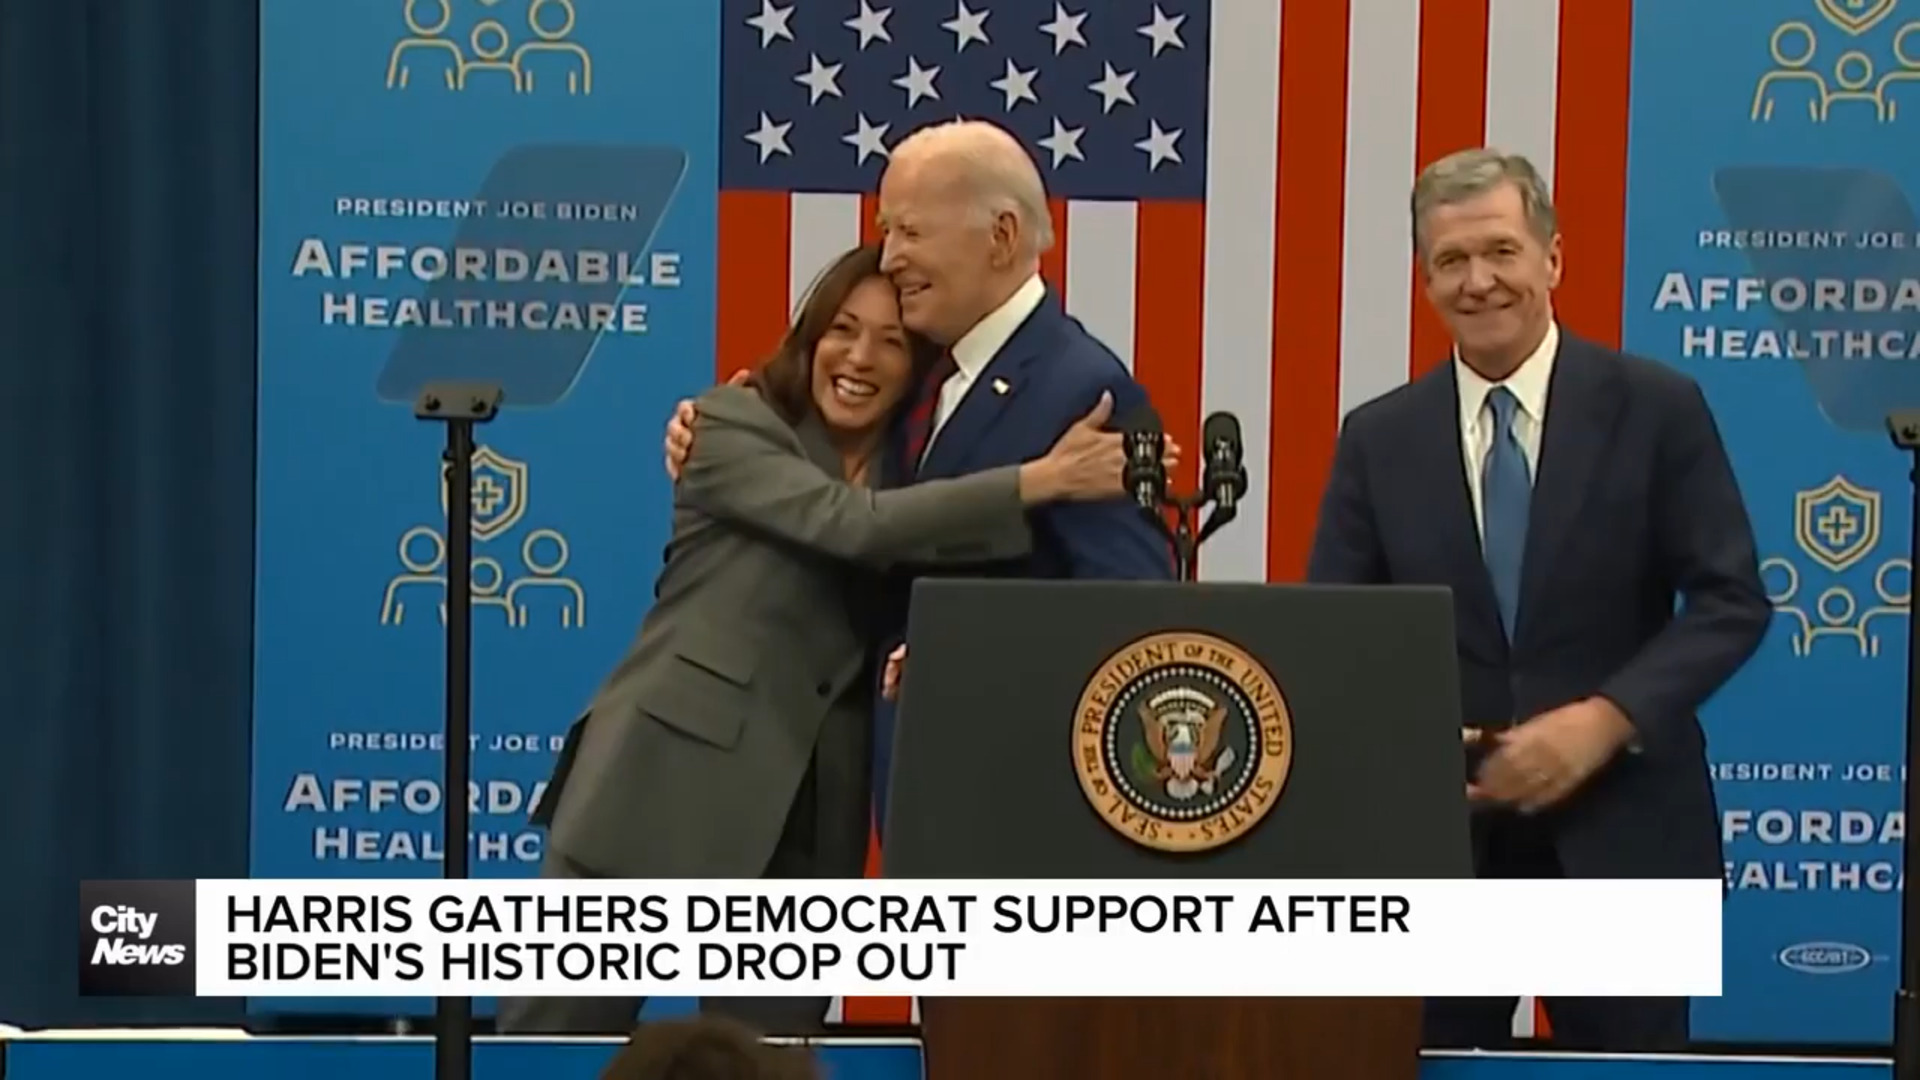 Harris gathers Democrat support after Biden's historic drop out